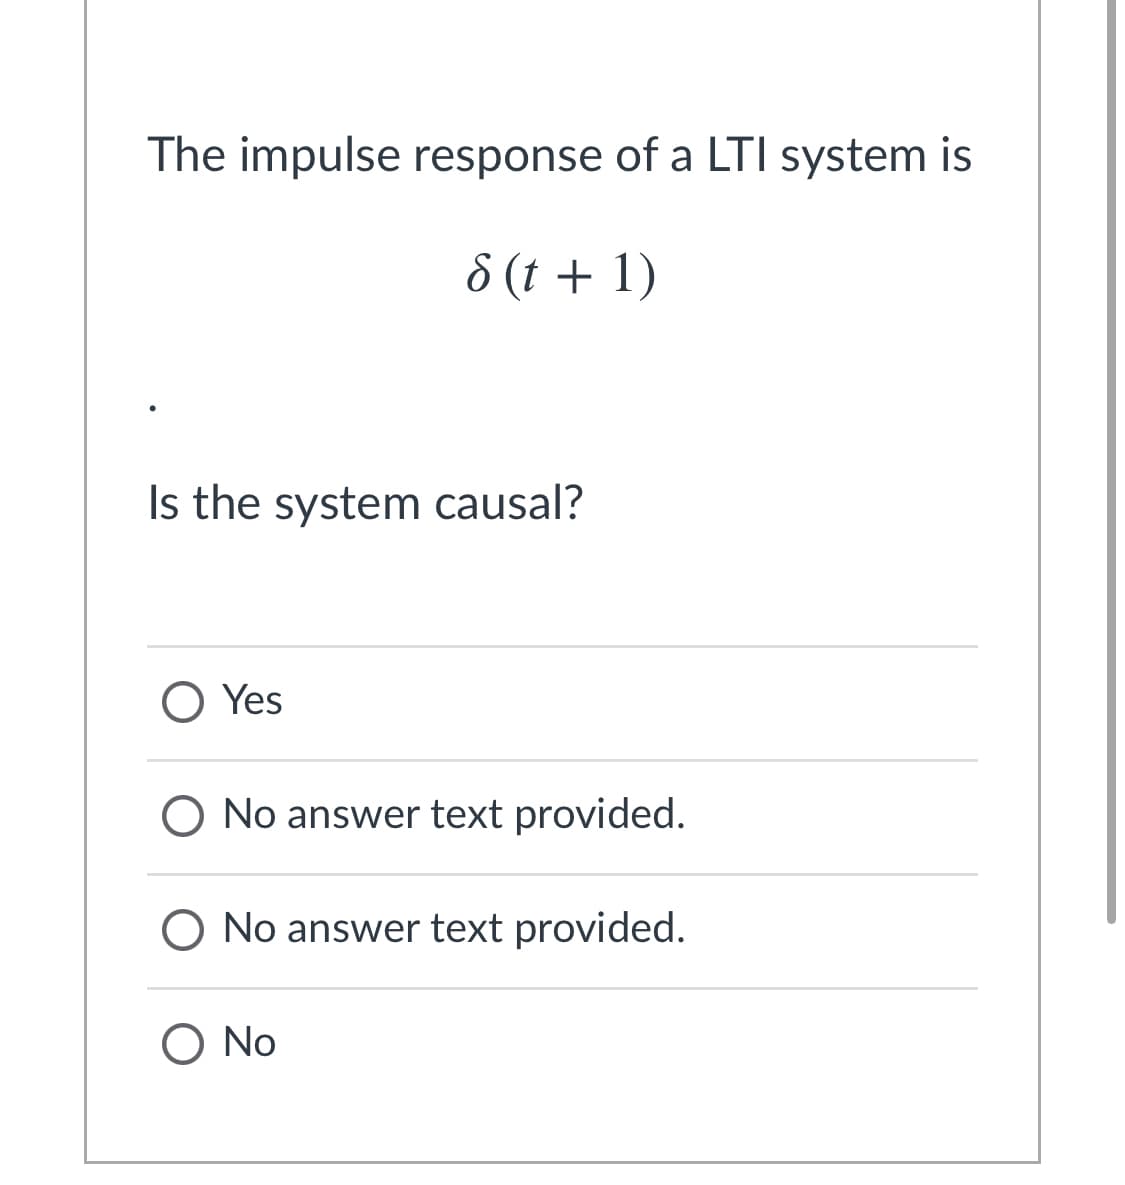 The impulse response of a LTI system is
8 (t + 1)
Is the system causal?
O Yes
O No answer text provided.
O No answer text provided.
O No
